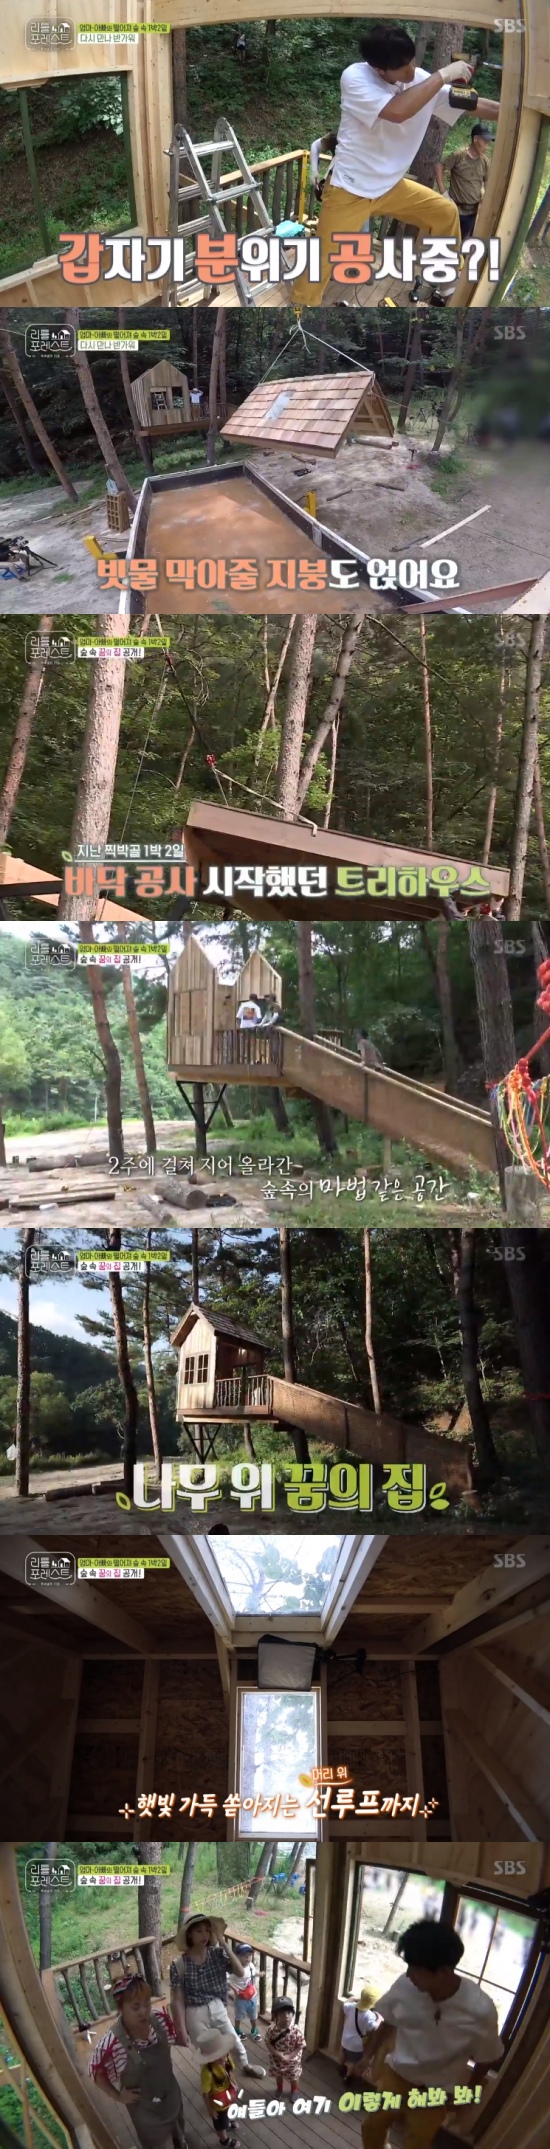 Actor Lee Seung-gi made a treehouse himself for the children.On SBS Little Forest broadcast on the 26th, Lee Seung-gi built a treehouse for two weeks for children.Lee Seung-gi was immersed in treehouse construction with Lee Seo-jin before the children arrived.At this time, Lee Seung-gi was excited to show the children a treehouse.Since then, the children have climbed the treehouse in the forest and admired it with their mouths saying it is very high.In addition, Lee Seung-gis treehouse boasted a durability that adults and children could run hard.Lee Han-gun asked, Can not you decorate? The children decided to collect the ingredients in the forest and decorate the treehouse.In particular, Lee Han and Kim Jin-heen moved a bigger log to each other and nervously fought, and Kim Jin-hee asked Park to help him move a log that was his size.The little girls tied the logs together and gathered their strengths together to move the logs to warm up, followed by a treehouse living room using logs and stones found by the children.Photo = SBS Broadcasting Screen